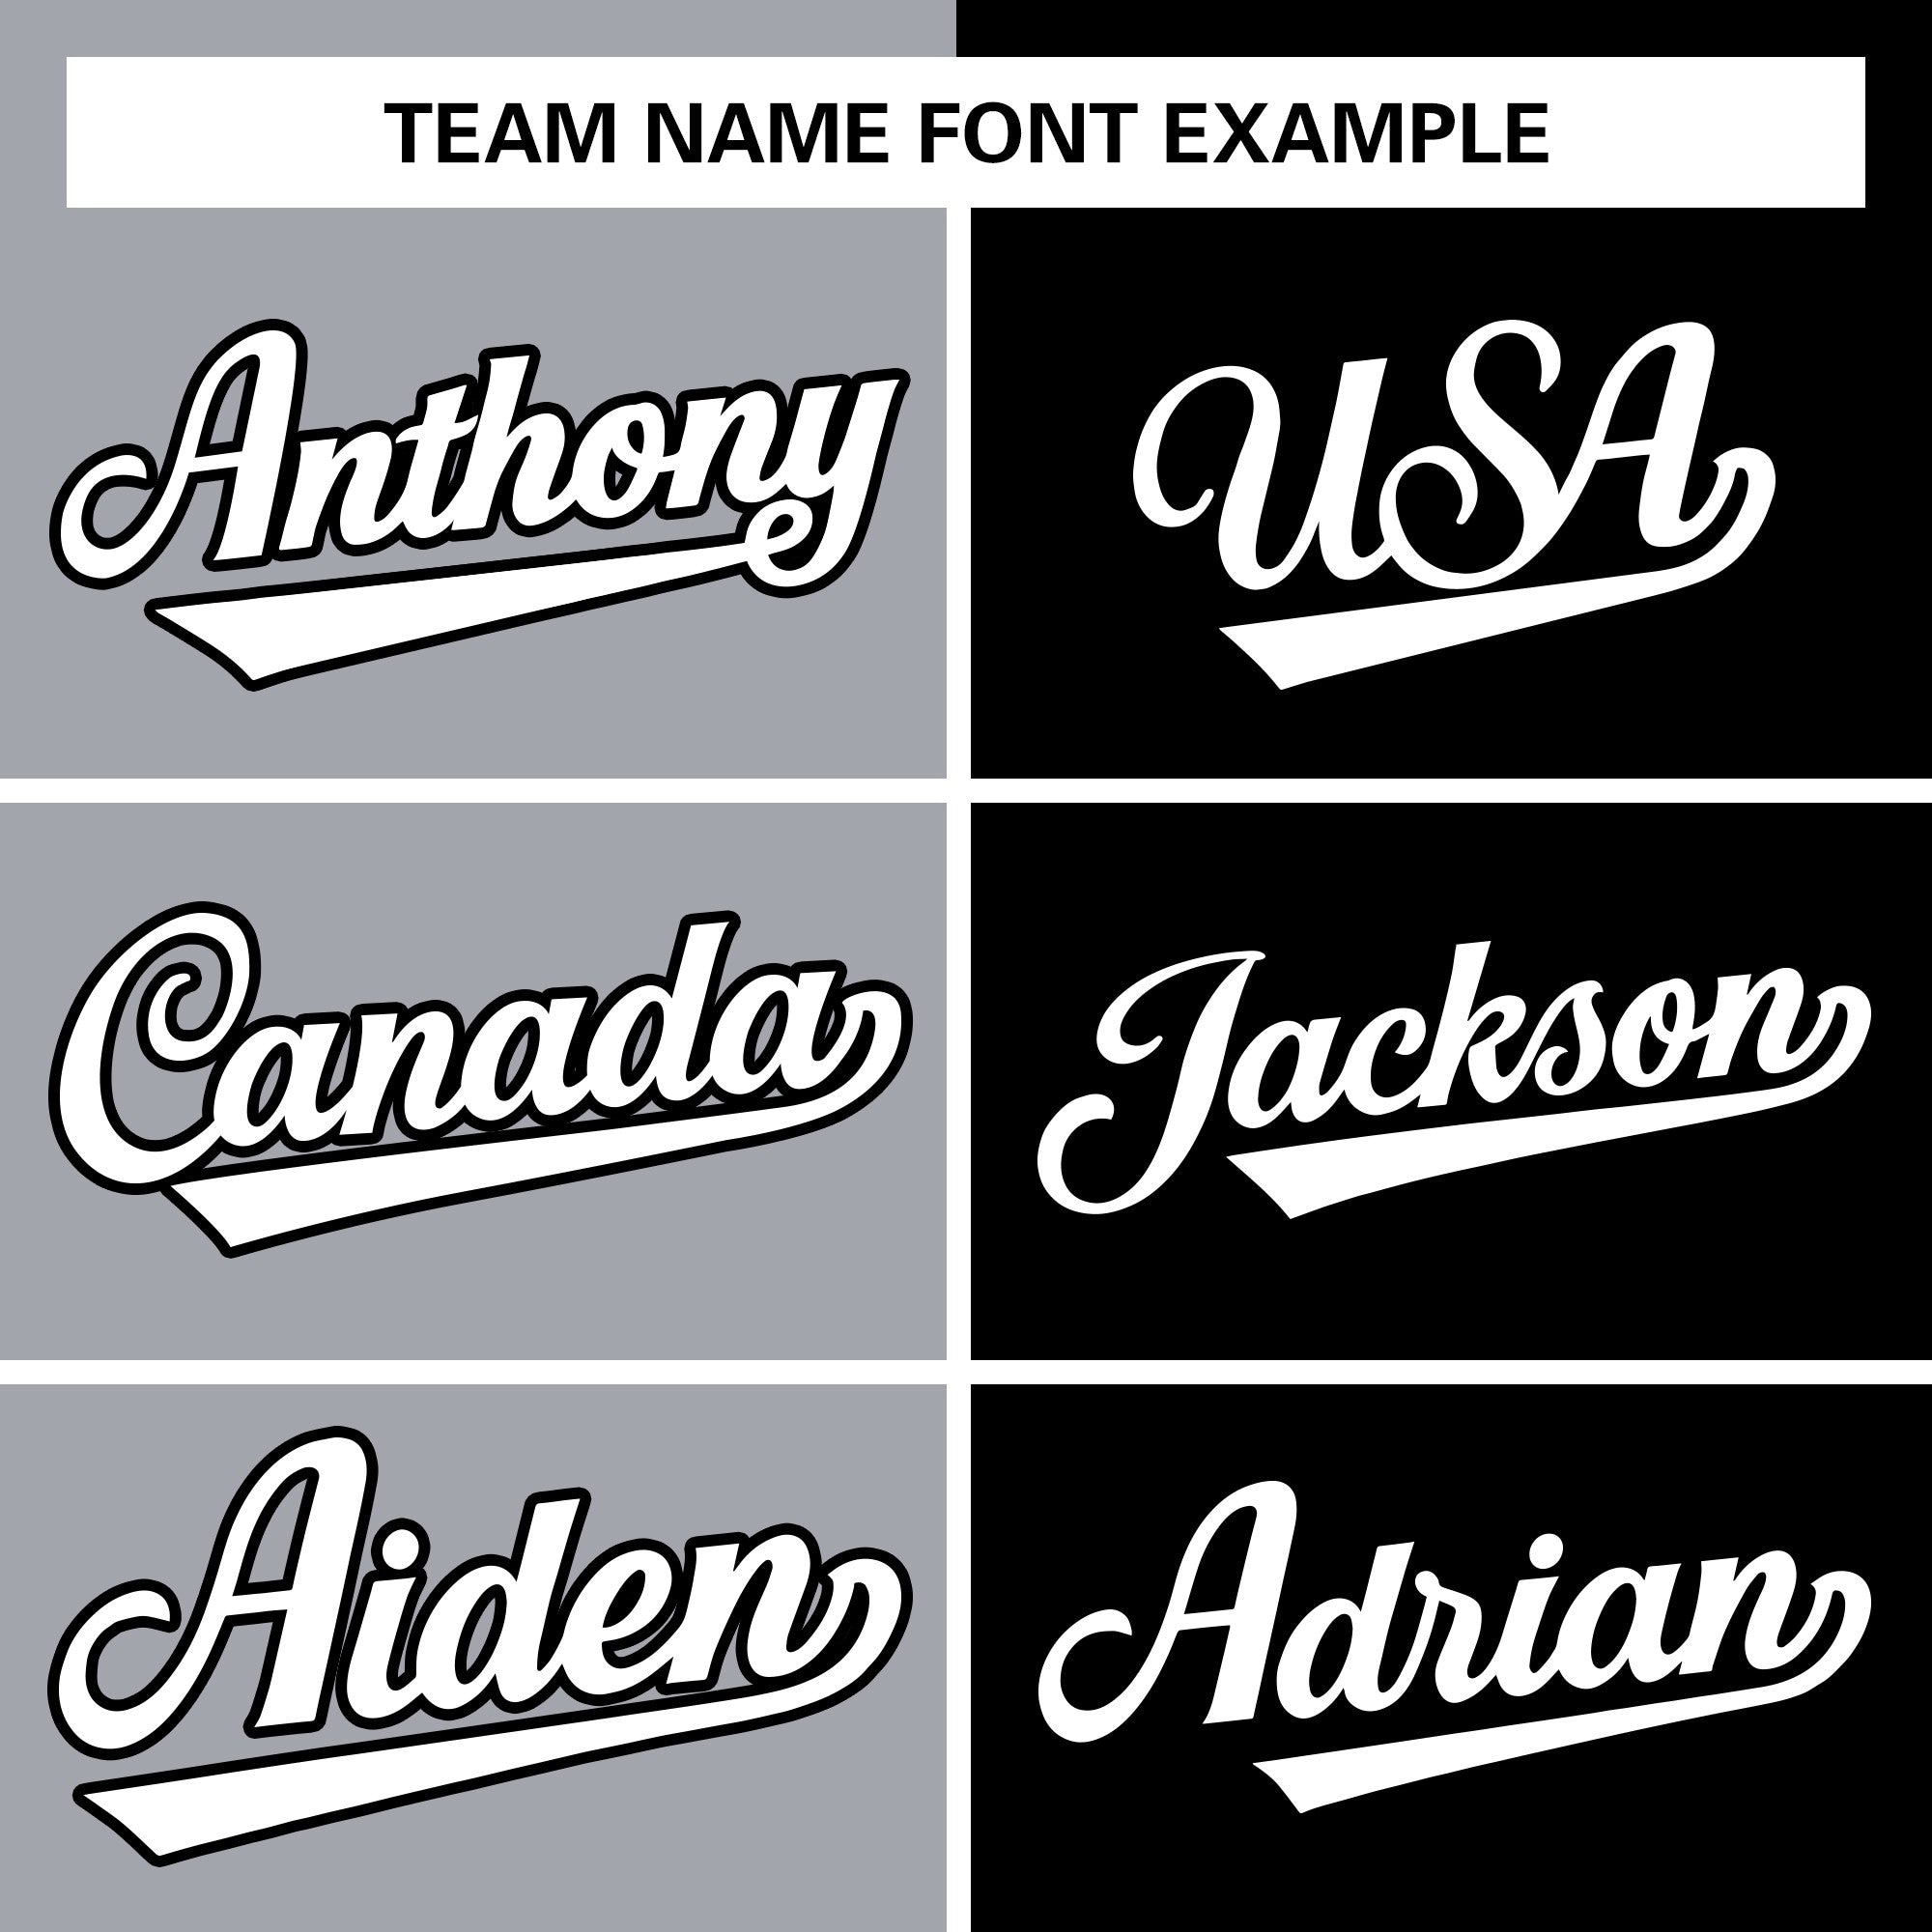 customize varsity full-snap jacket embroidered team name font example